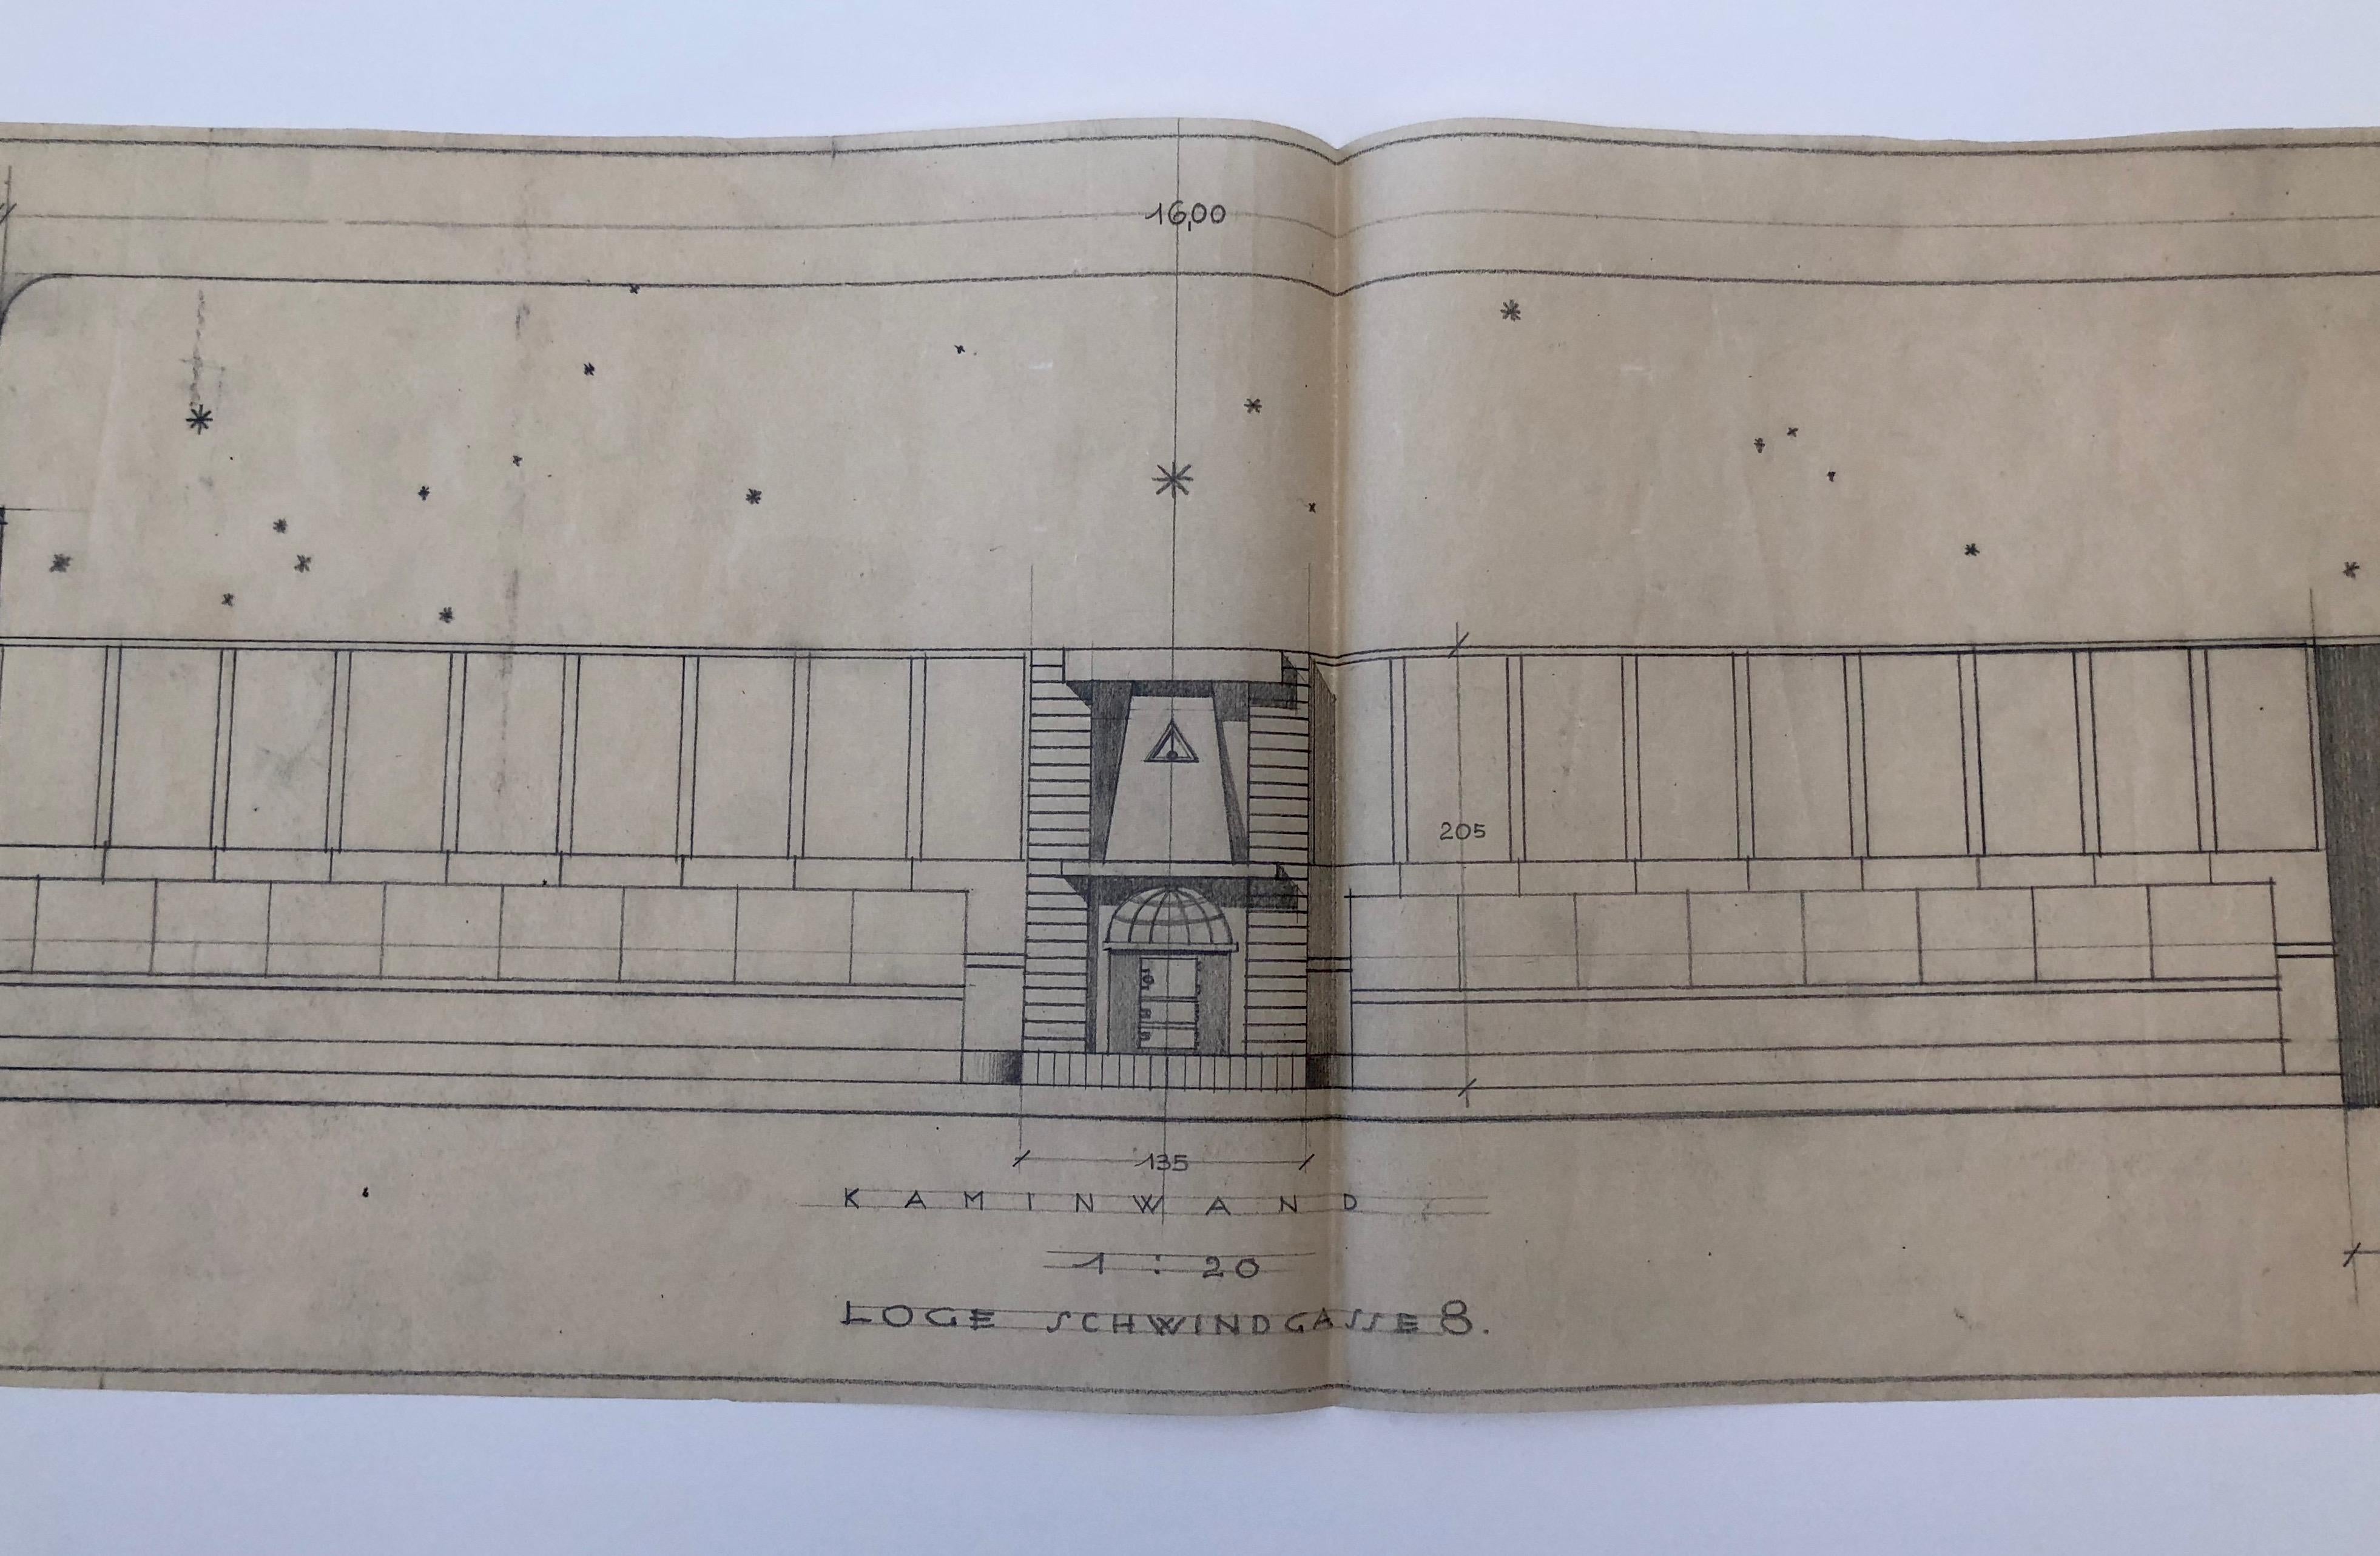 Set of Working Drawings, 1930, for a Free Masons Lodge, Schwind Gasse, Vienna For Sale 9